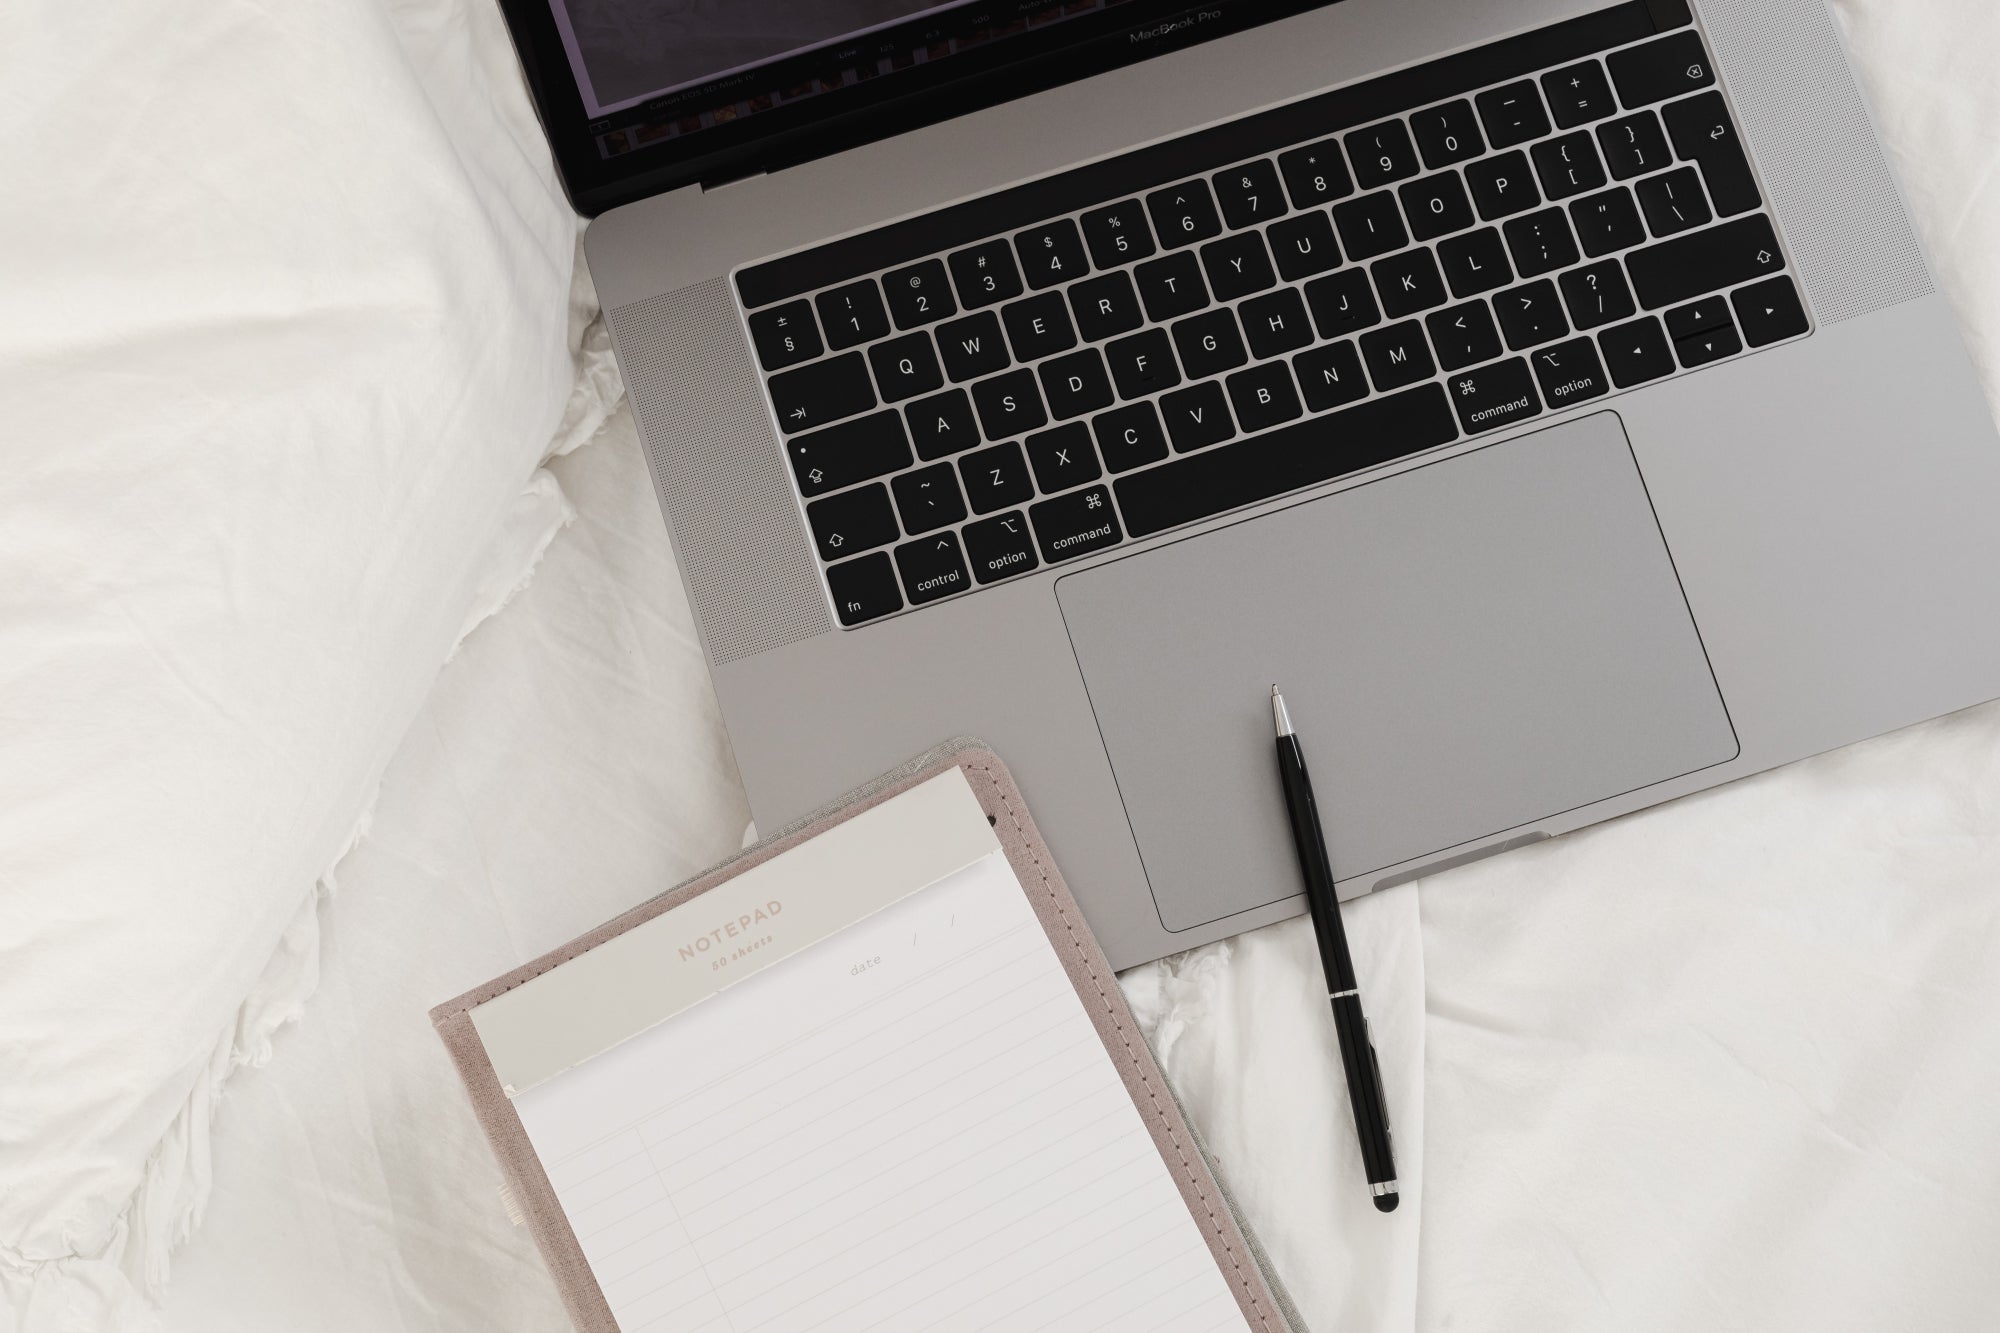 kaboompics_working-with-a-laptop-in-bed-white-cotton-bedding-blank-notebook-pen-28939.jpg